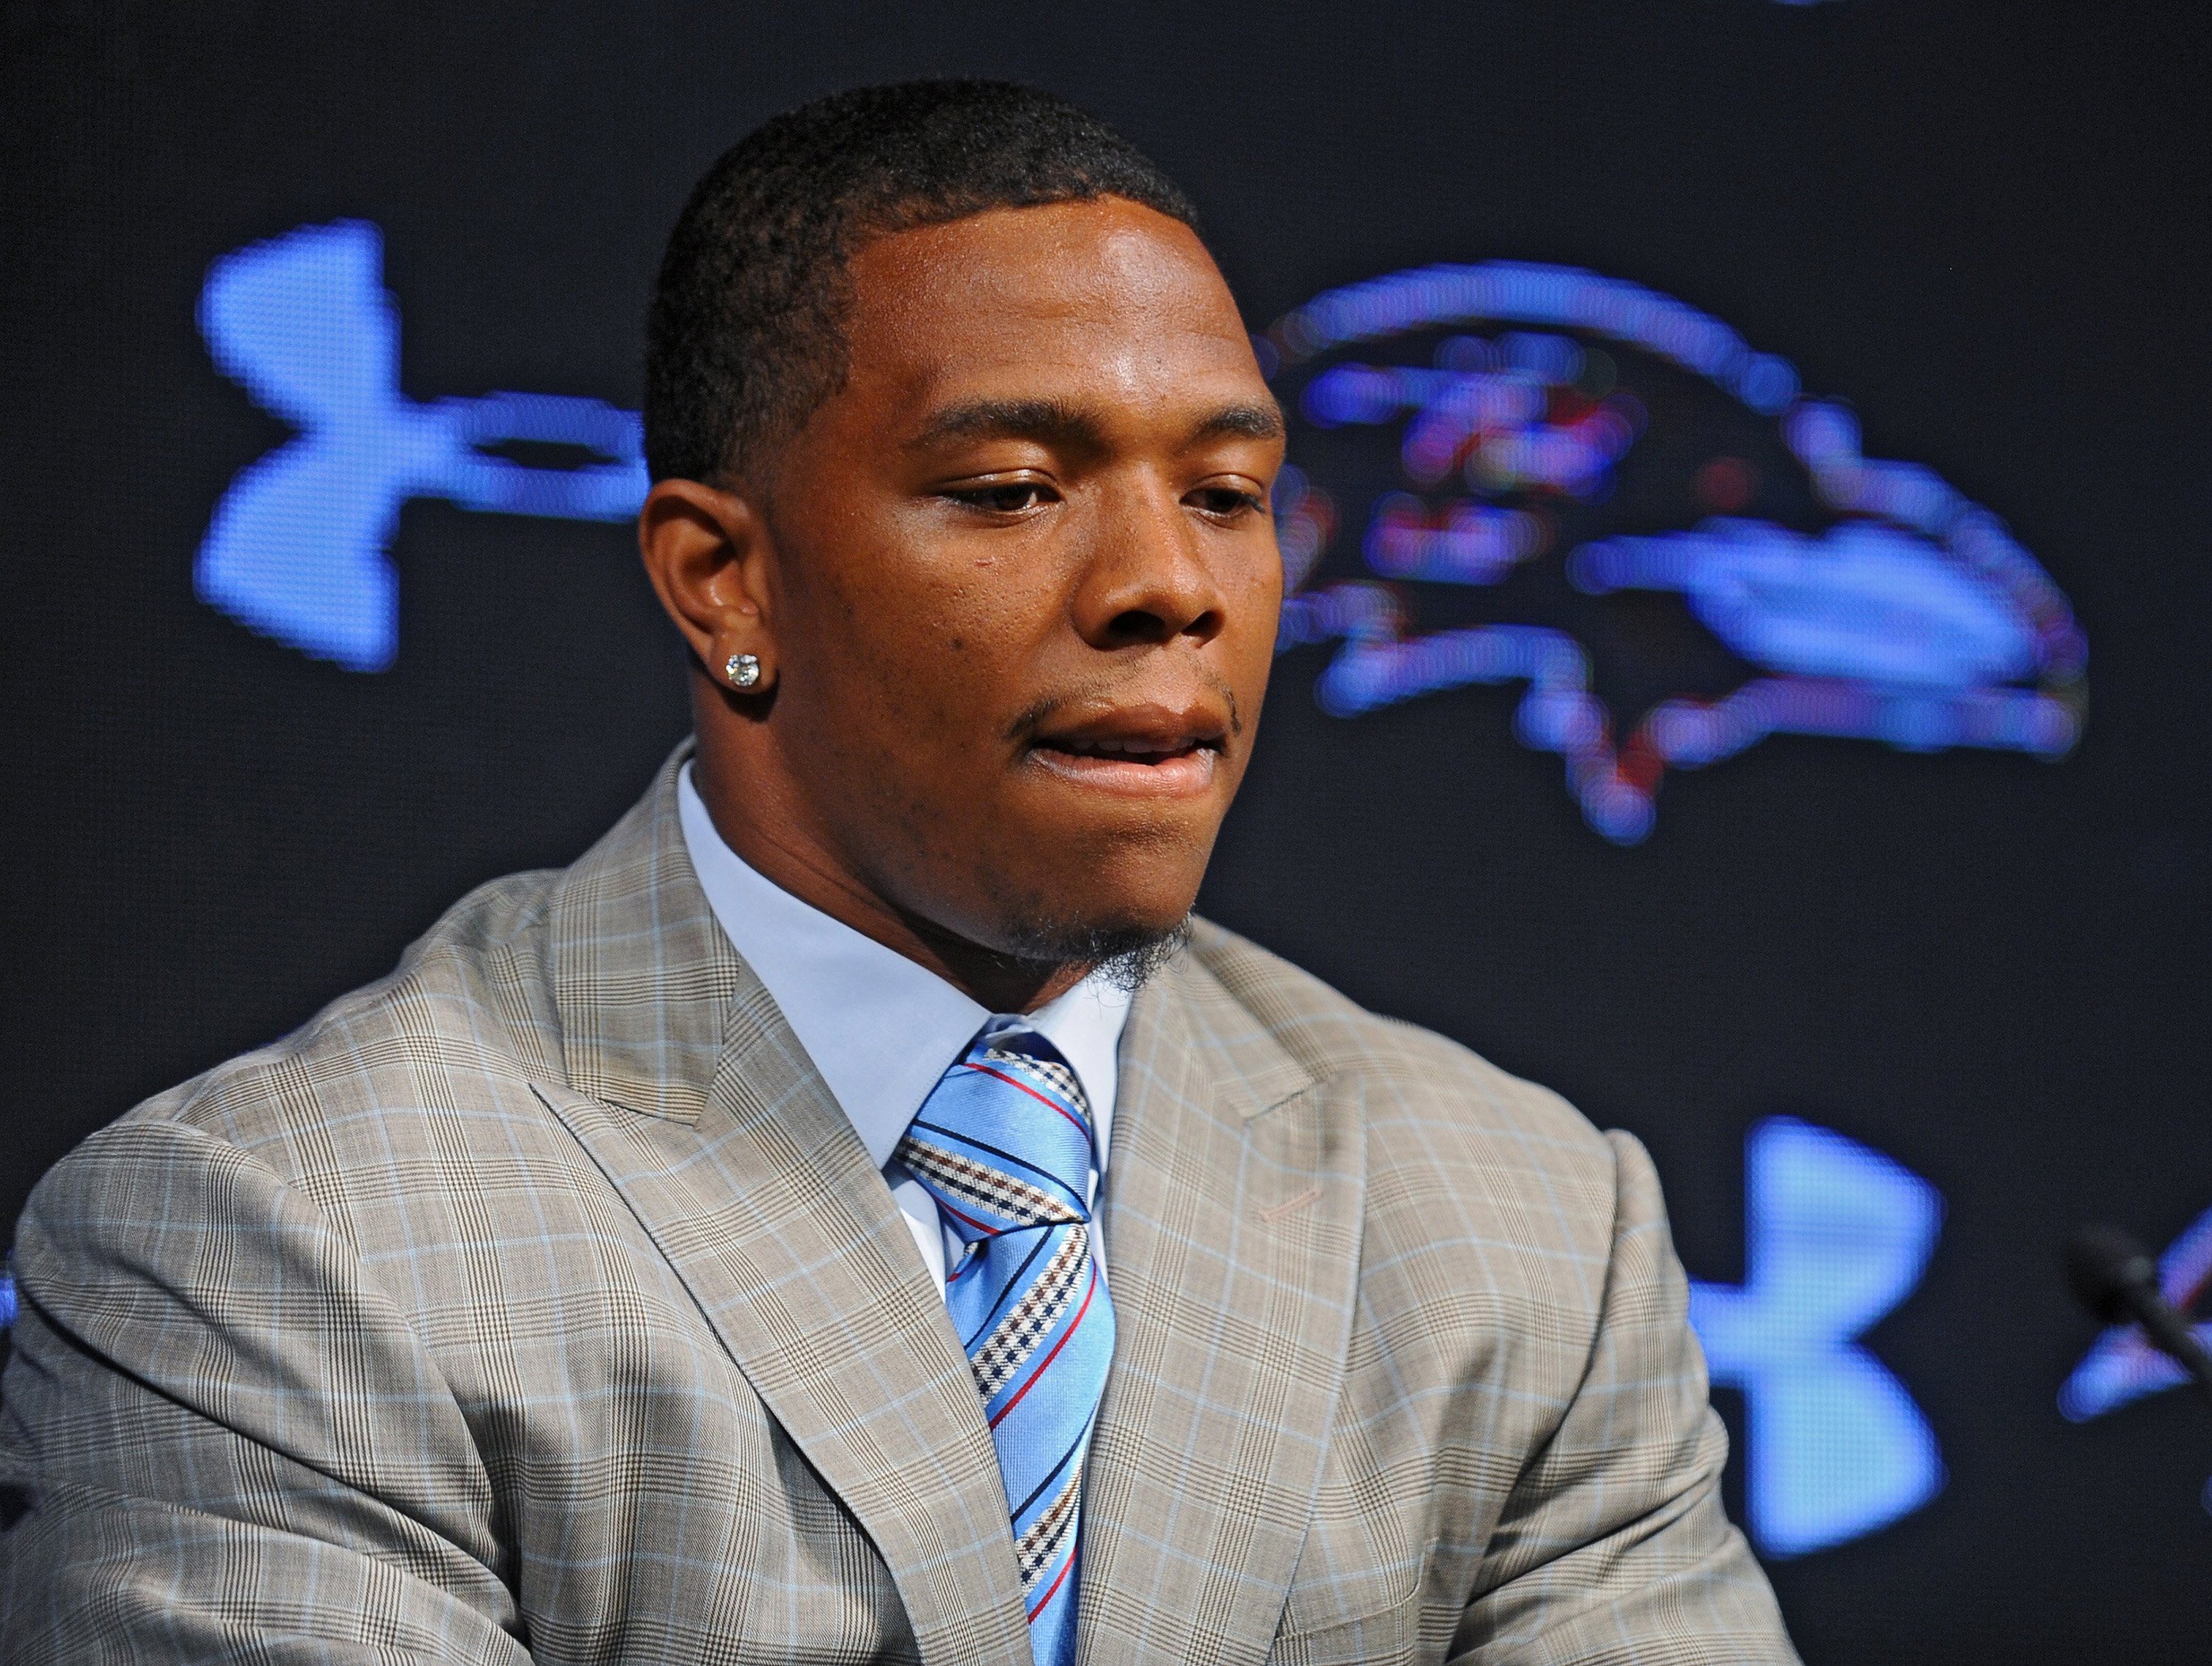 Ravens running back Ray Rice is planning to address the media at 3 p.m. Friday for the first time since he was charged with knocking